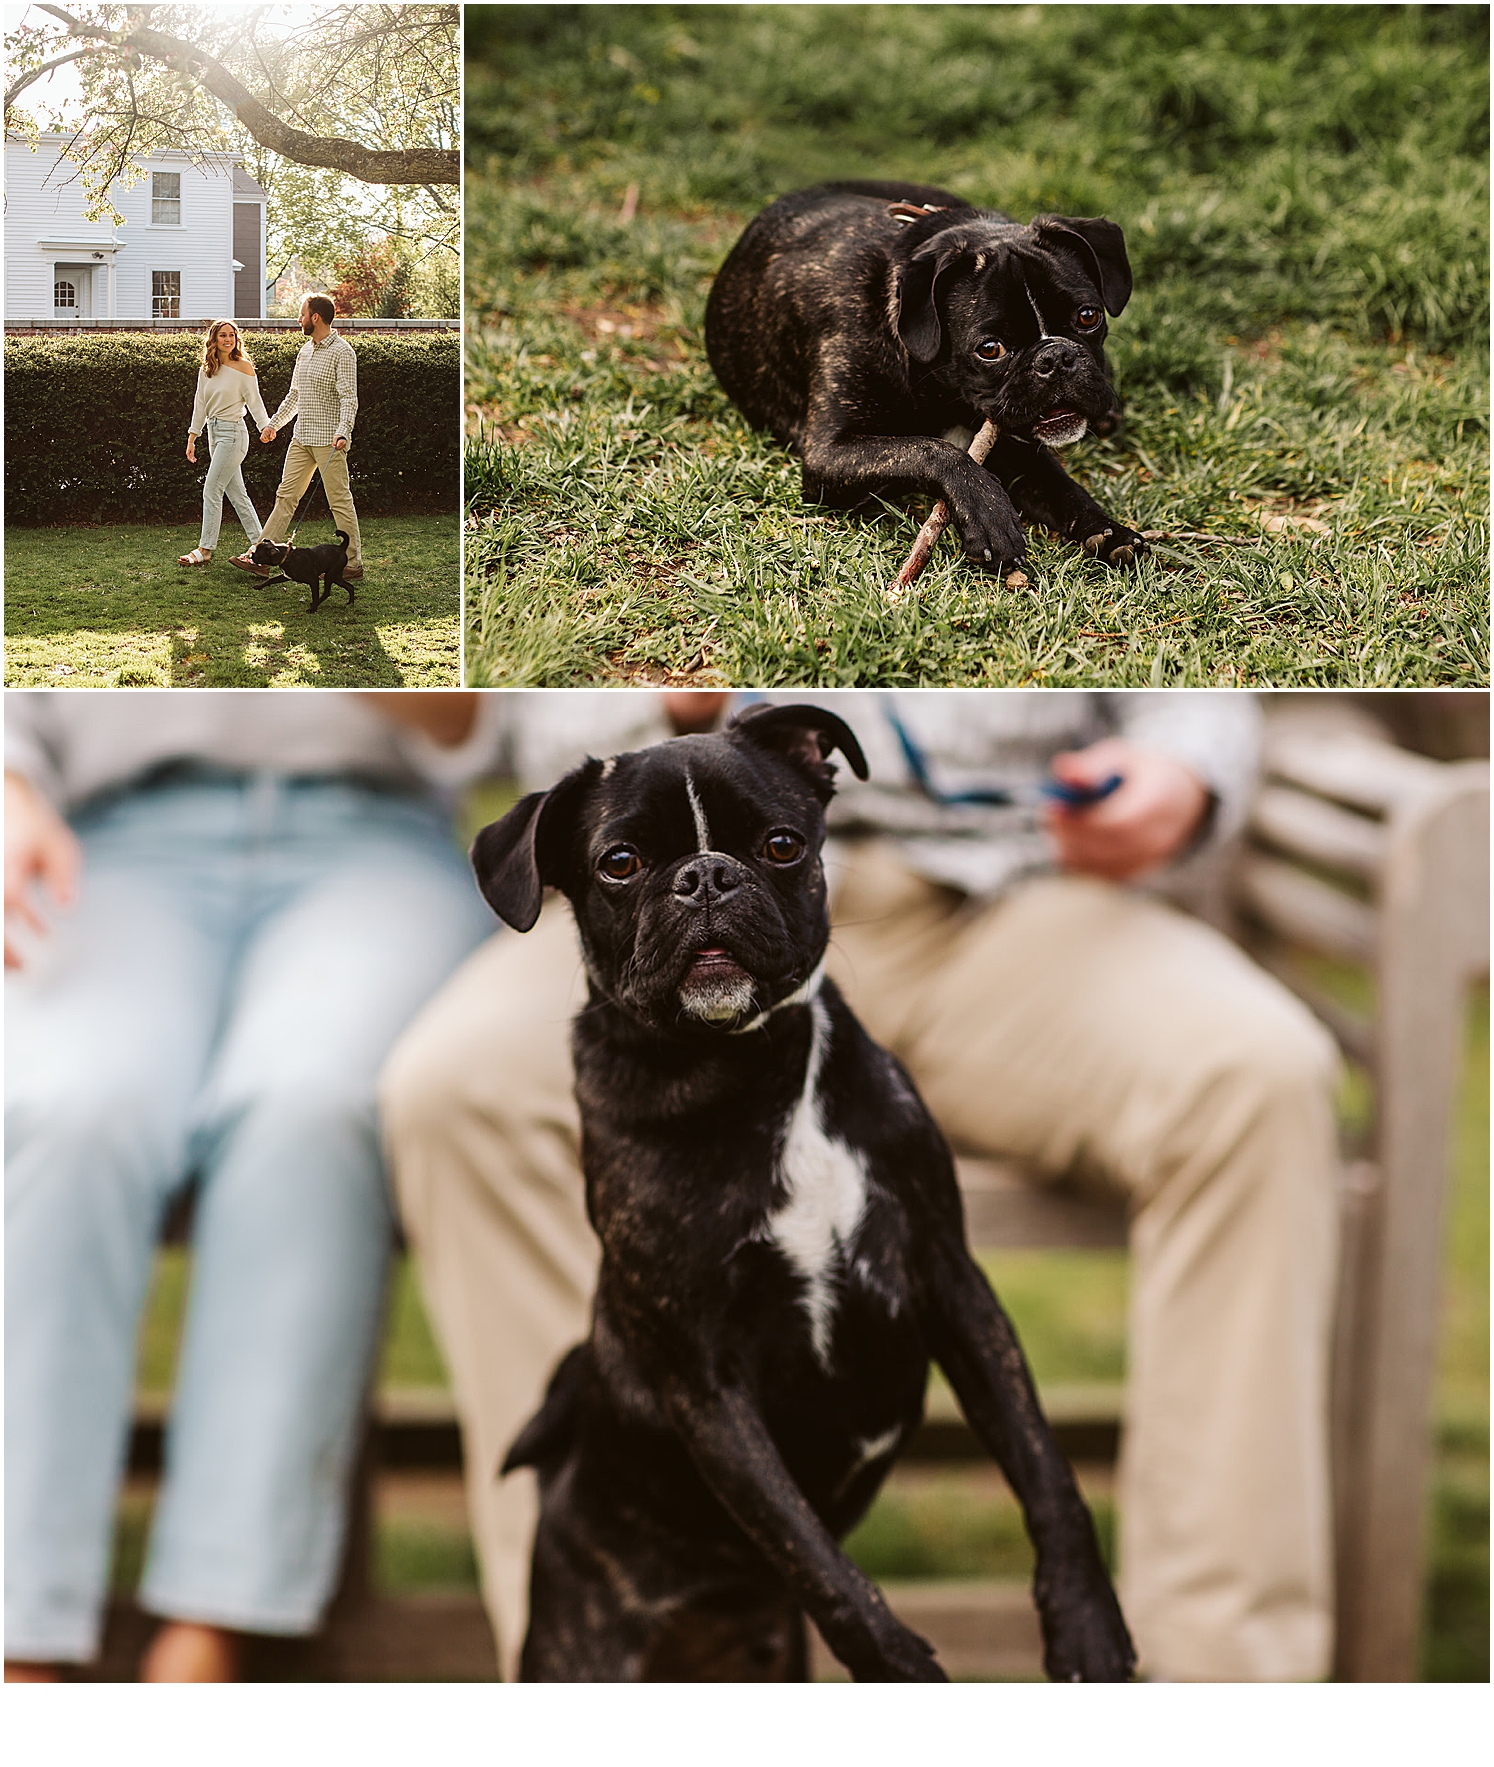 Engagement photo session in Salem MA with puppy